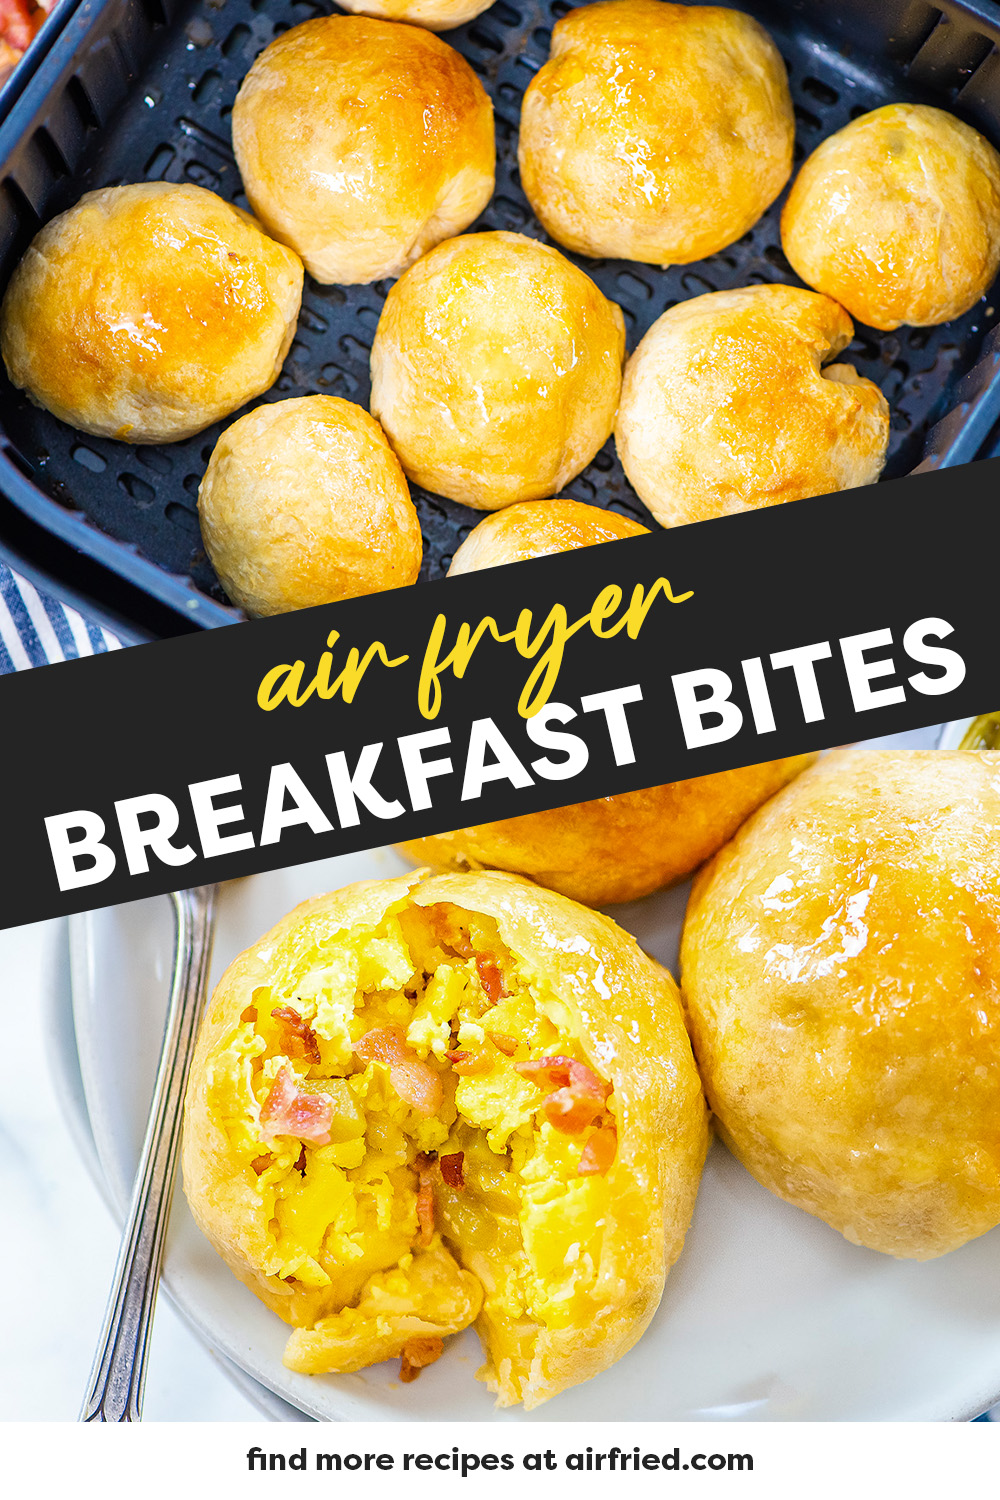 These air fryer breakfast bites are filled with meat and eggs and have a maple butter coating.  They are so amazing!